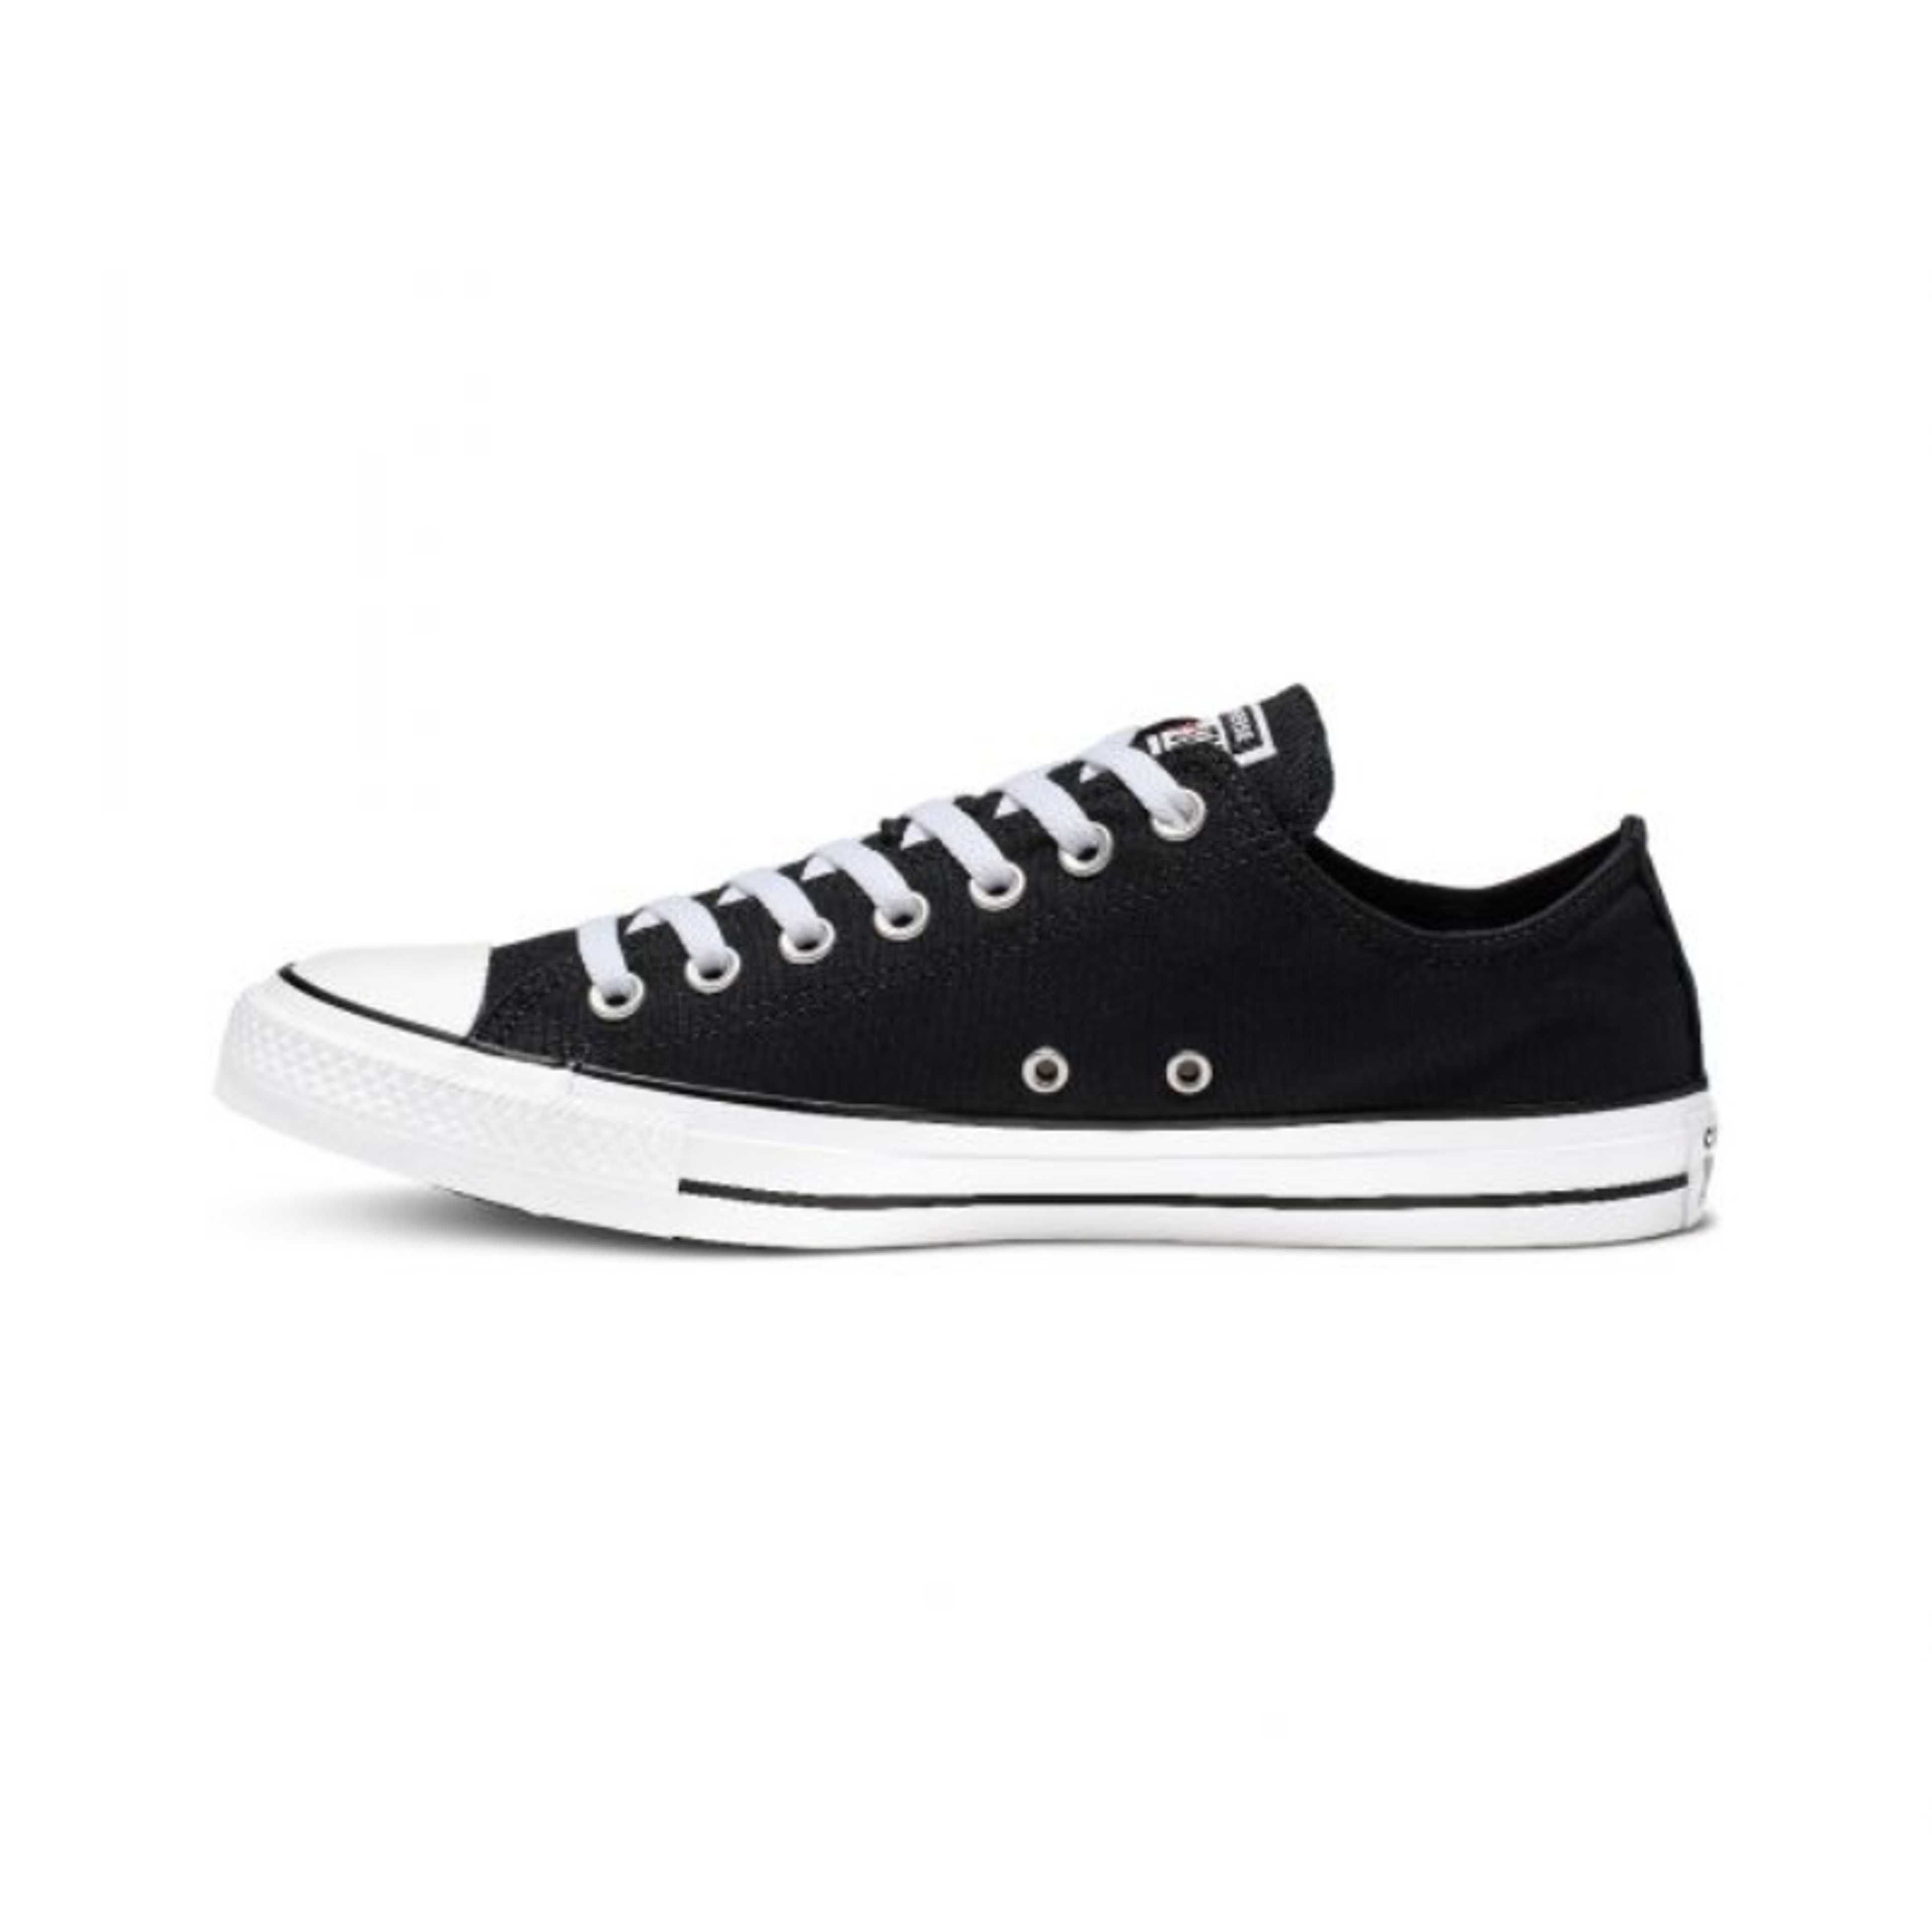 New Chuck Taylor All Star Wordmark Low Top-16